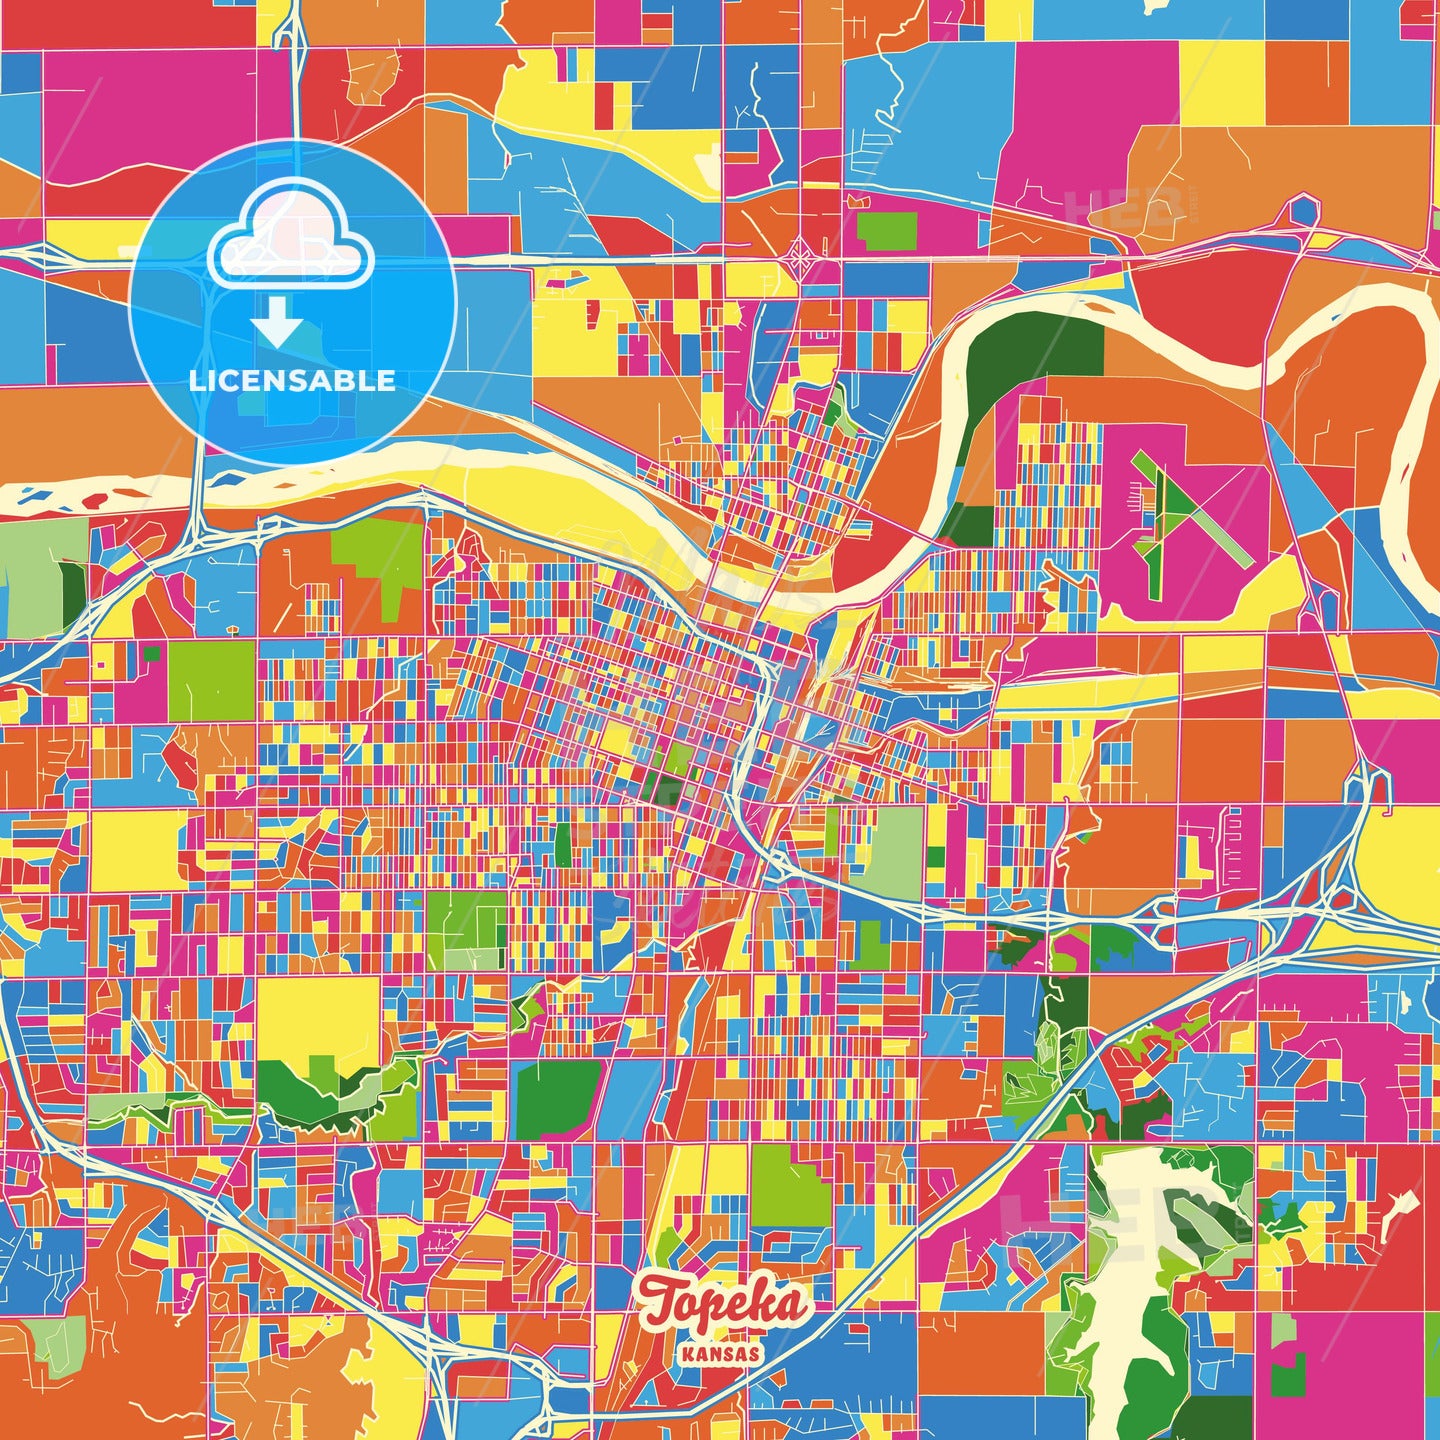 Topeka, United States Crazy Colorful Street Map Poster Template - HEBSTREITS Sketches